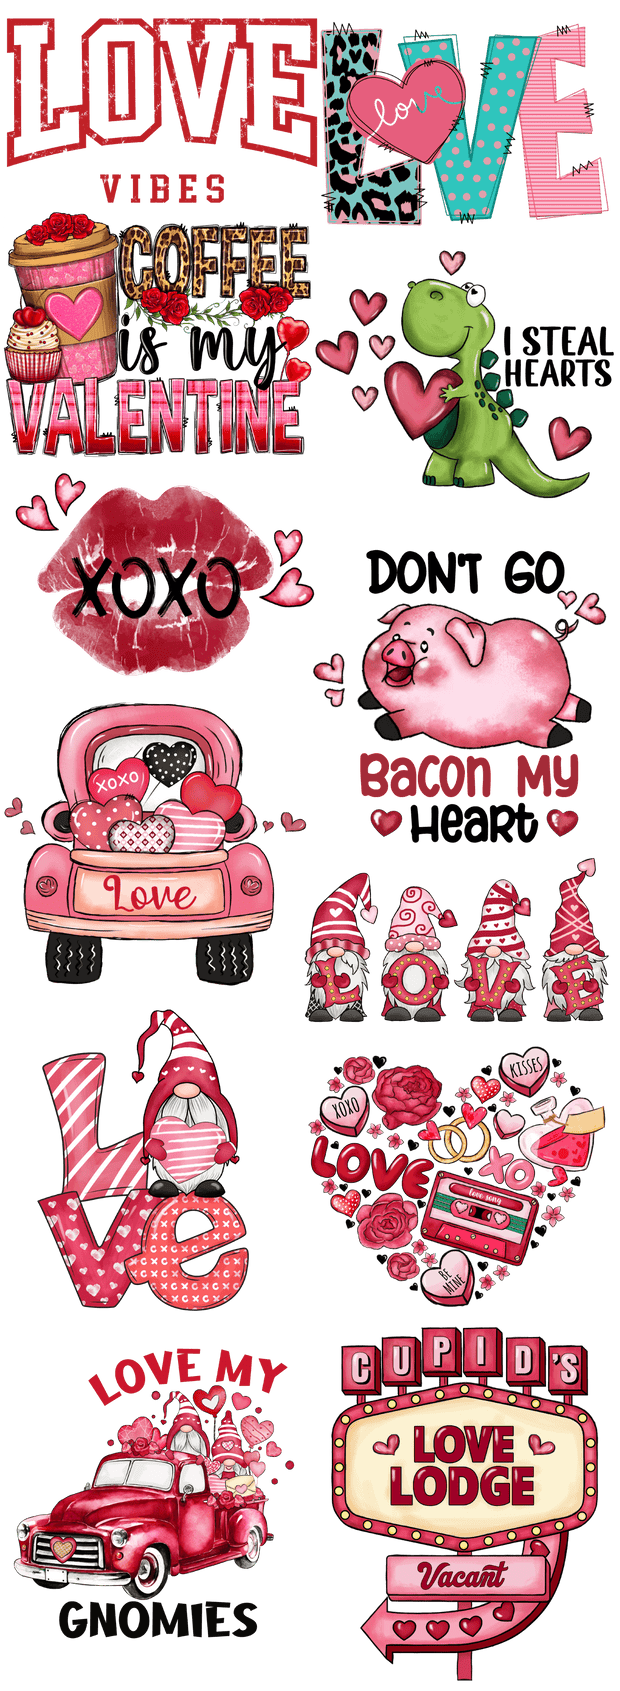 Valentine's Day 2 60"x22" Ready to Ship Gang Sheet - Twisted Image Transfers